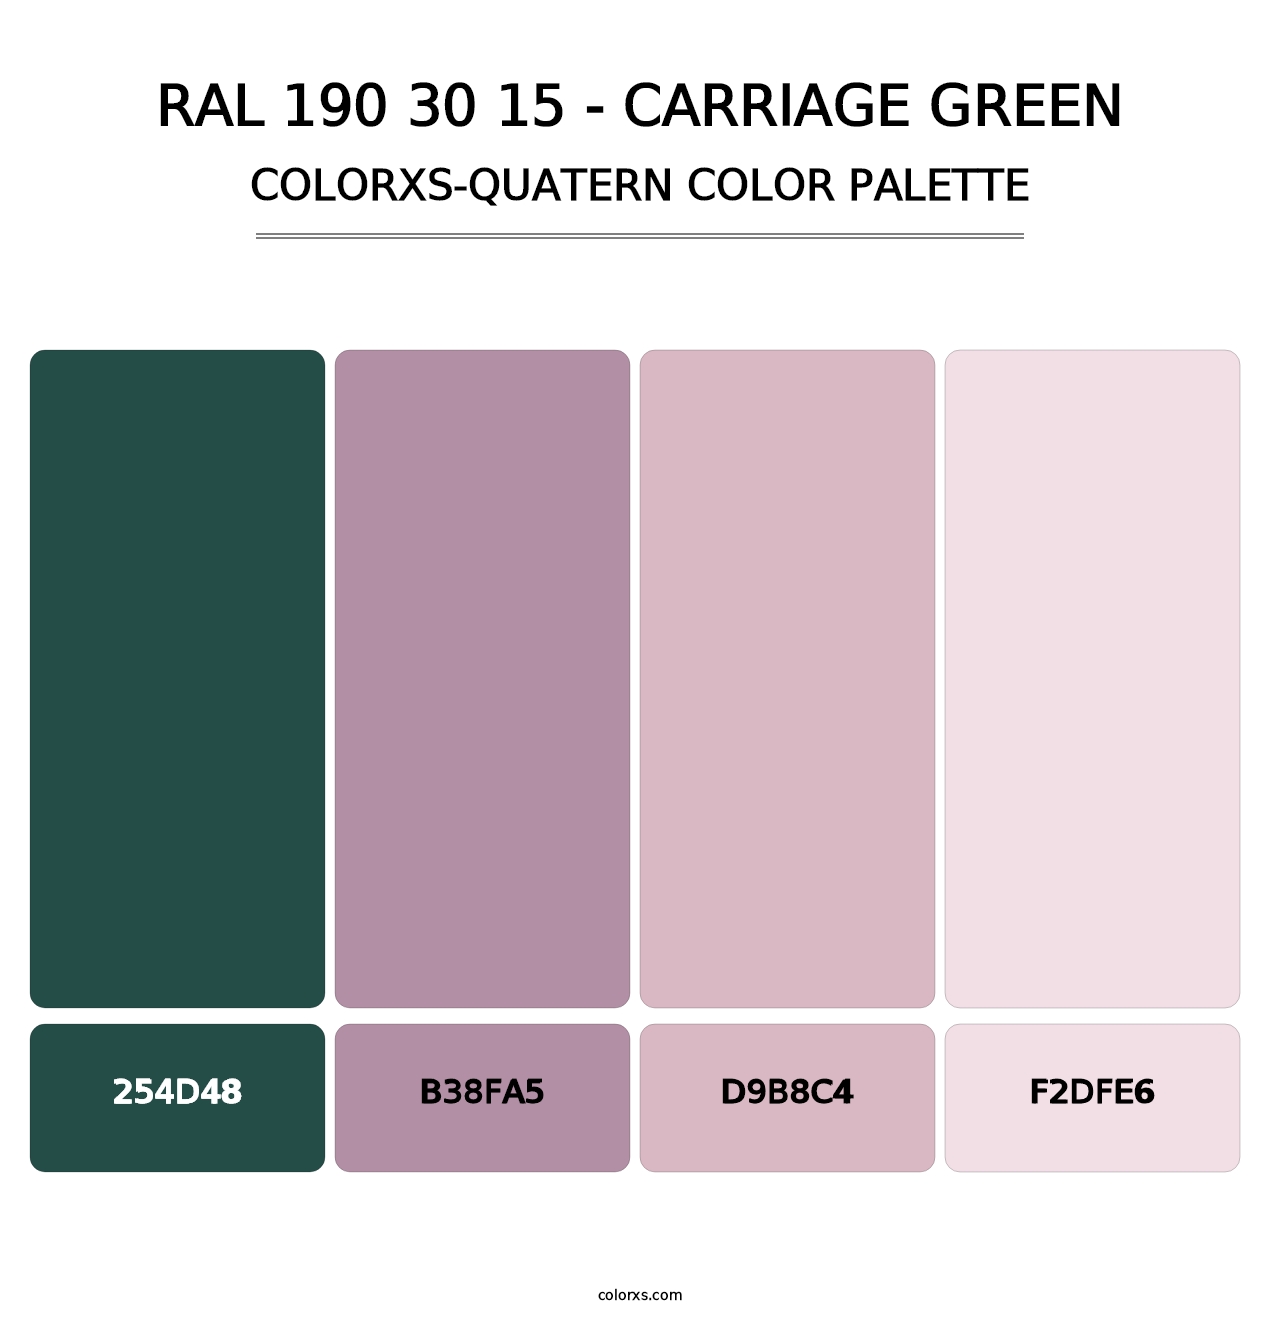 RAL 190 30 15 - Carriage Green - Colorxs Quatern Palette